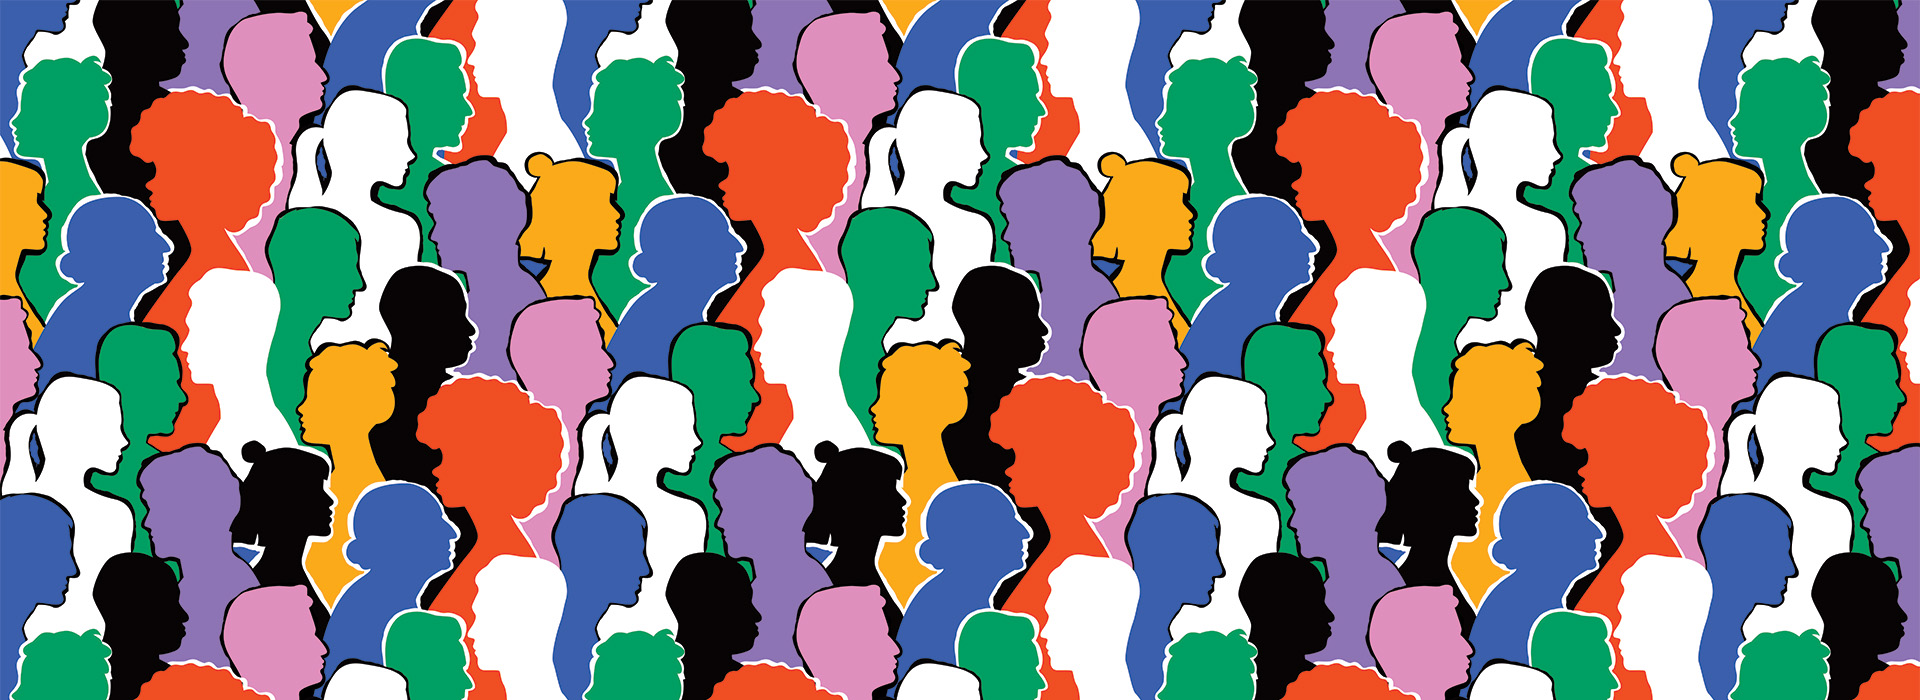 Colored silhouettes of people overlap from left to right.